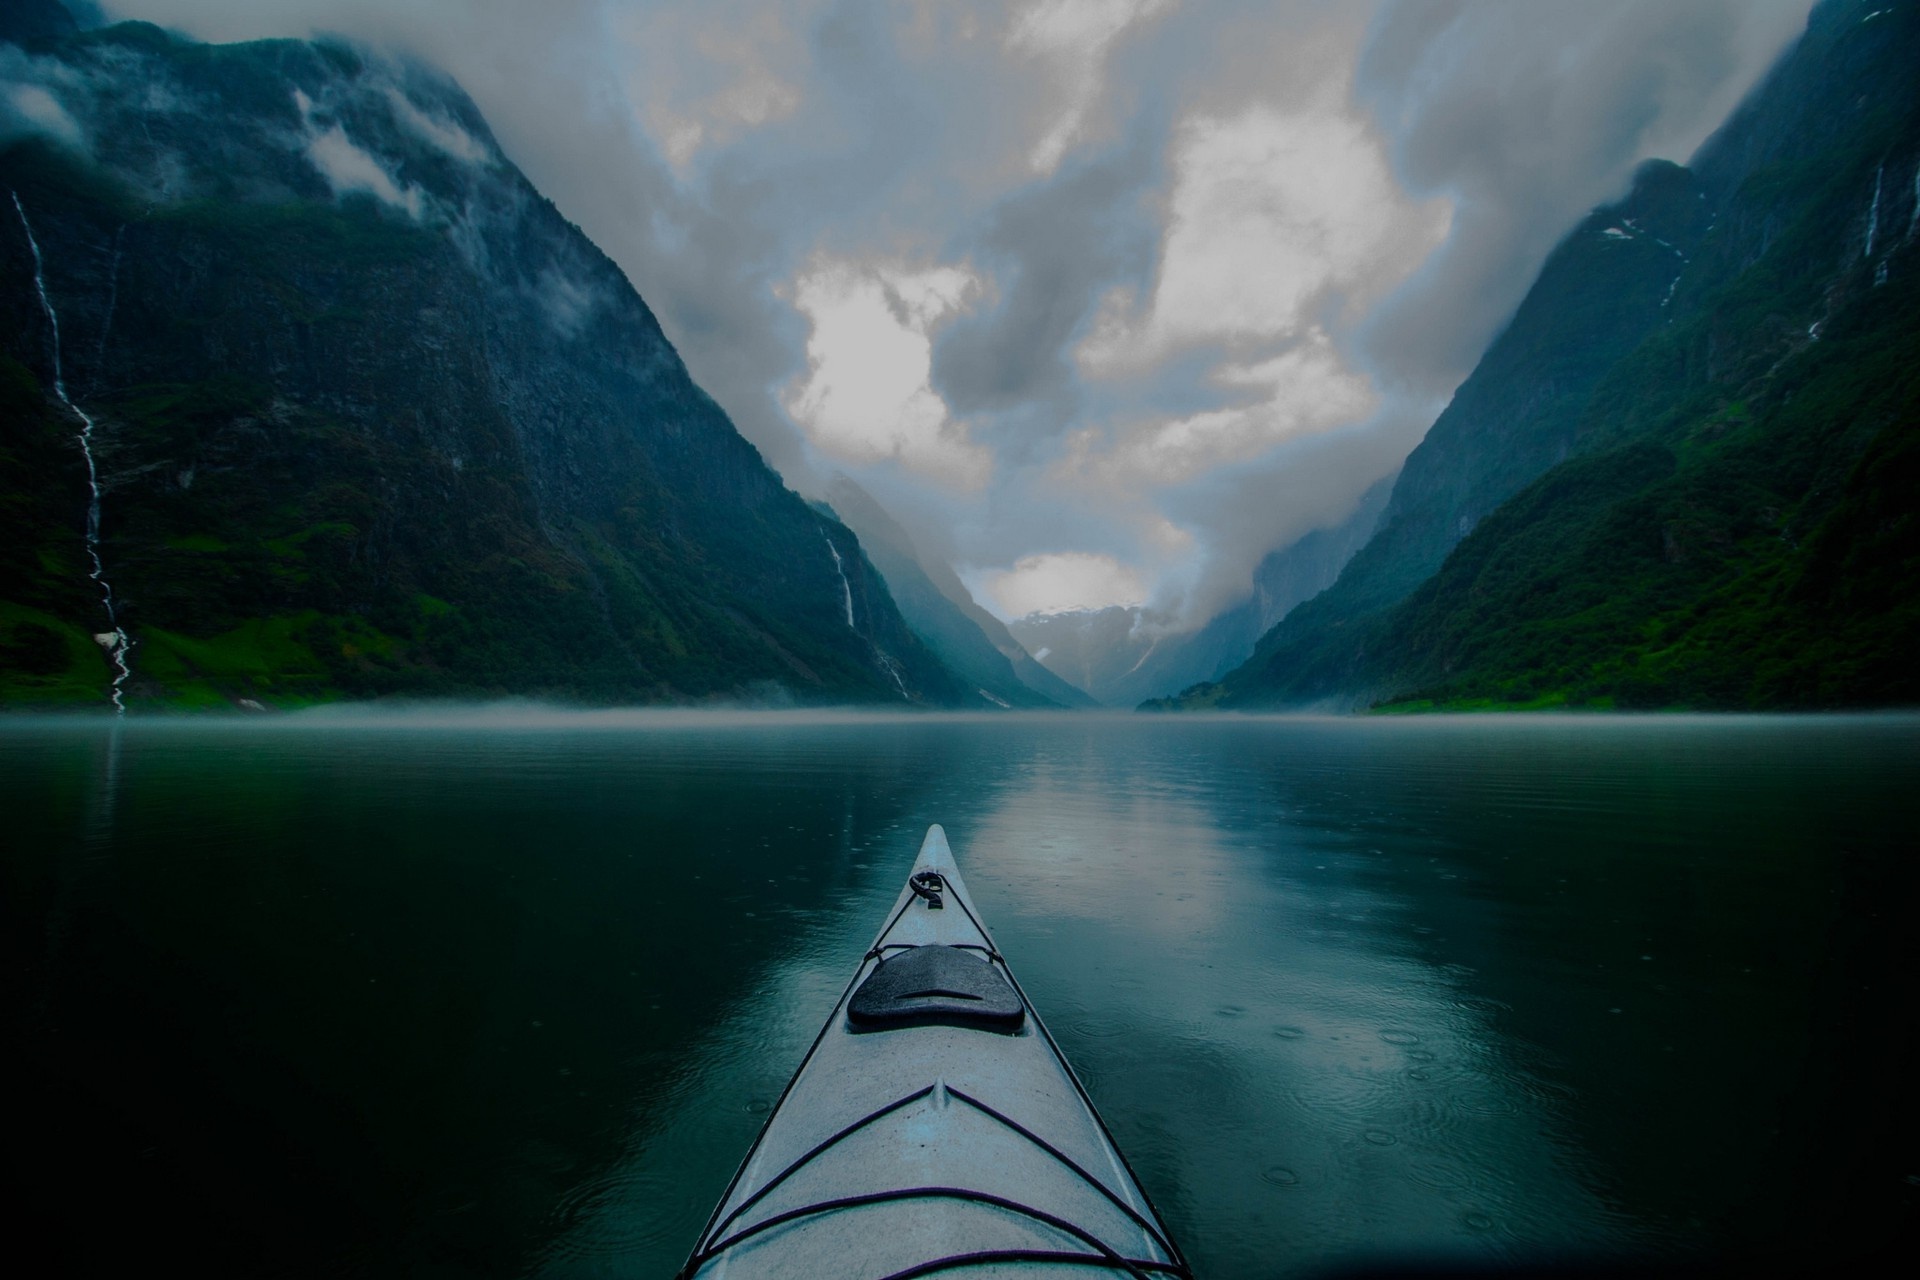 Kayaking: An extended water trip, Recreational boating in the foggy natural landscape. 1920x1280 HD Background.